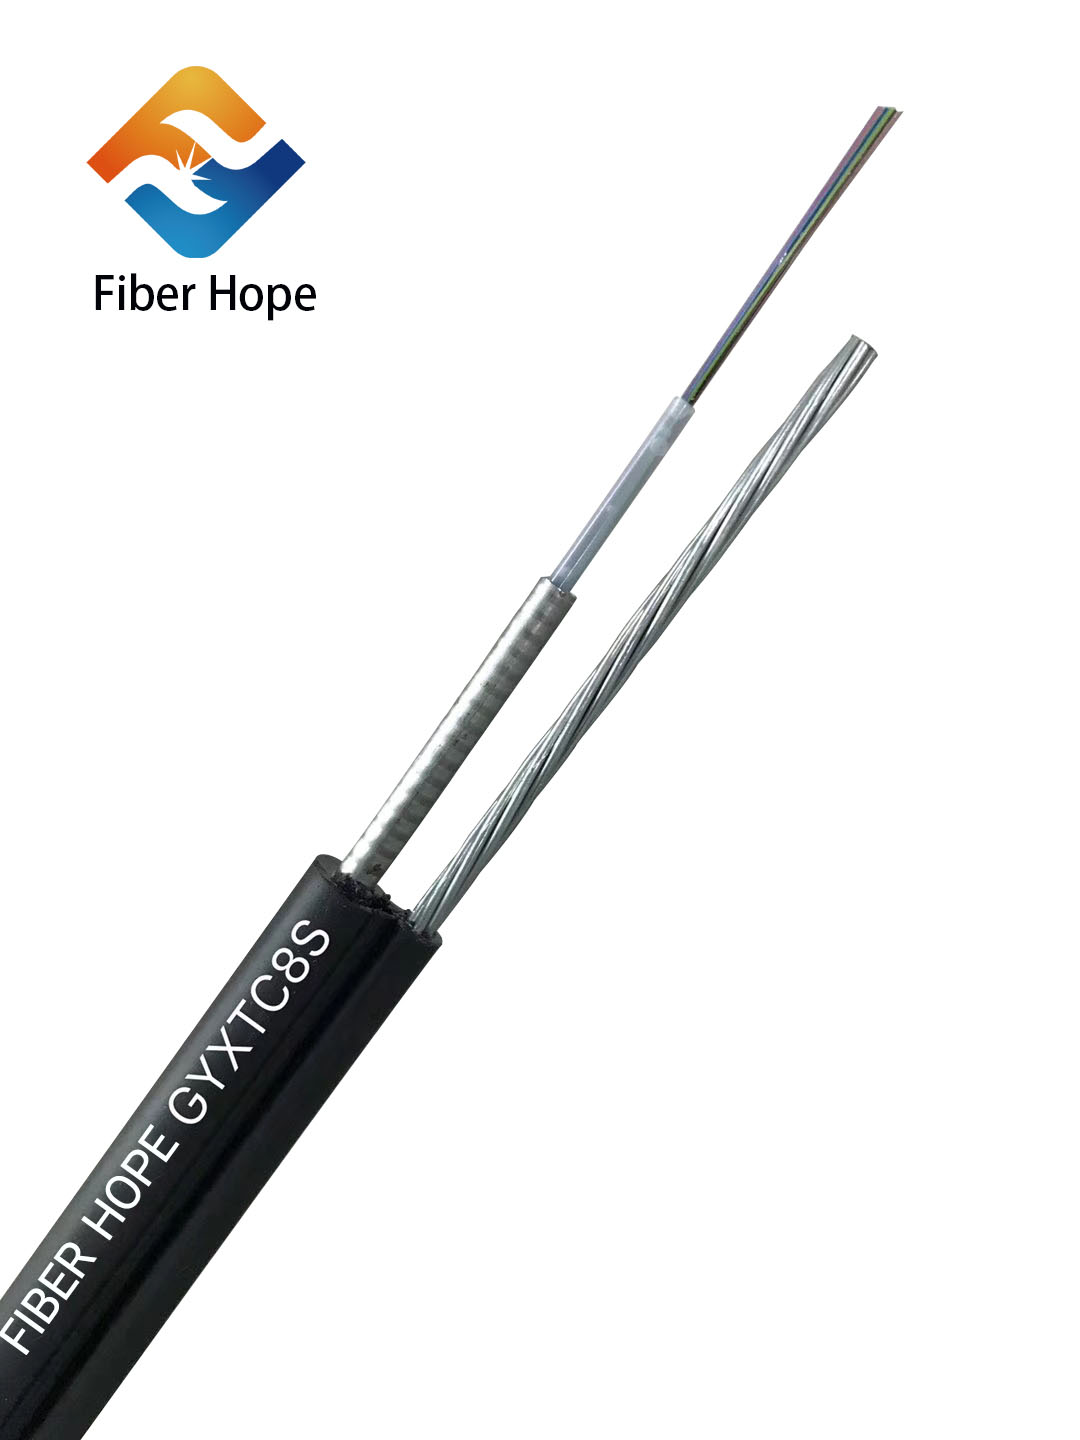 news-What about design of outdoor fiber optic cable by Fiber Hope Fiber Optic Cable-Fiber Hope-img